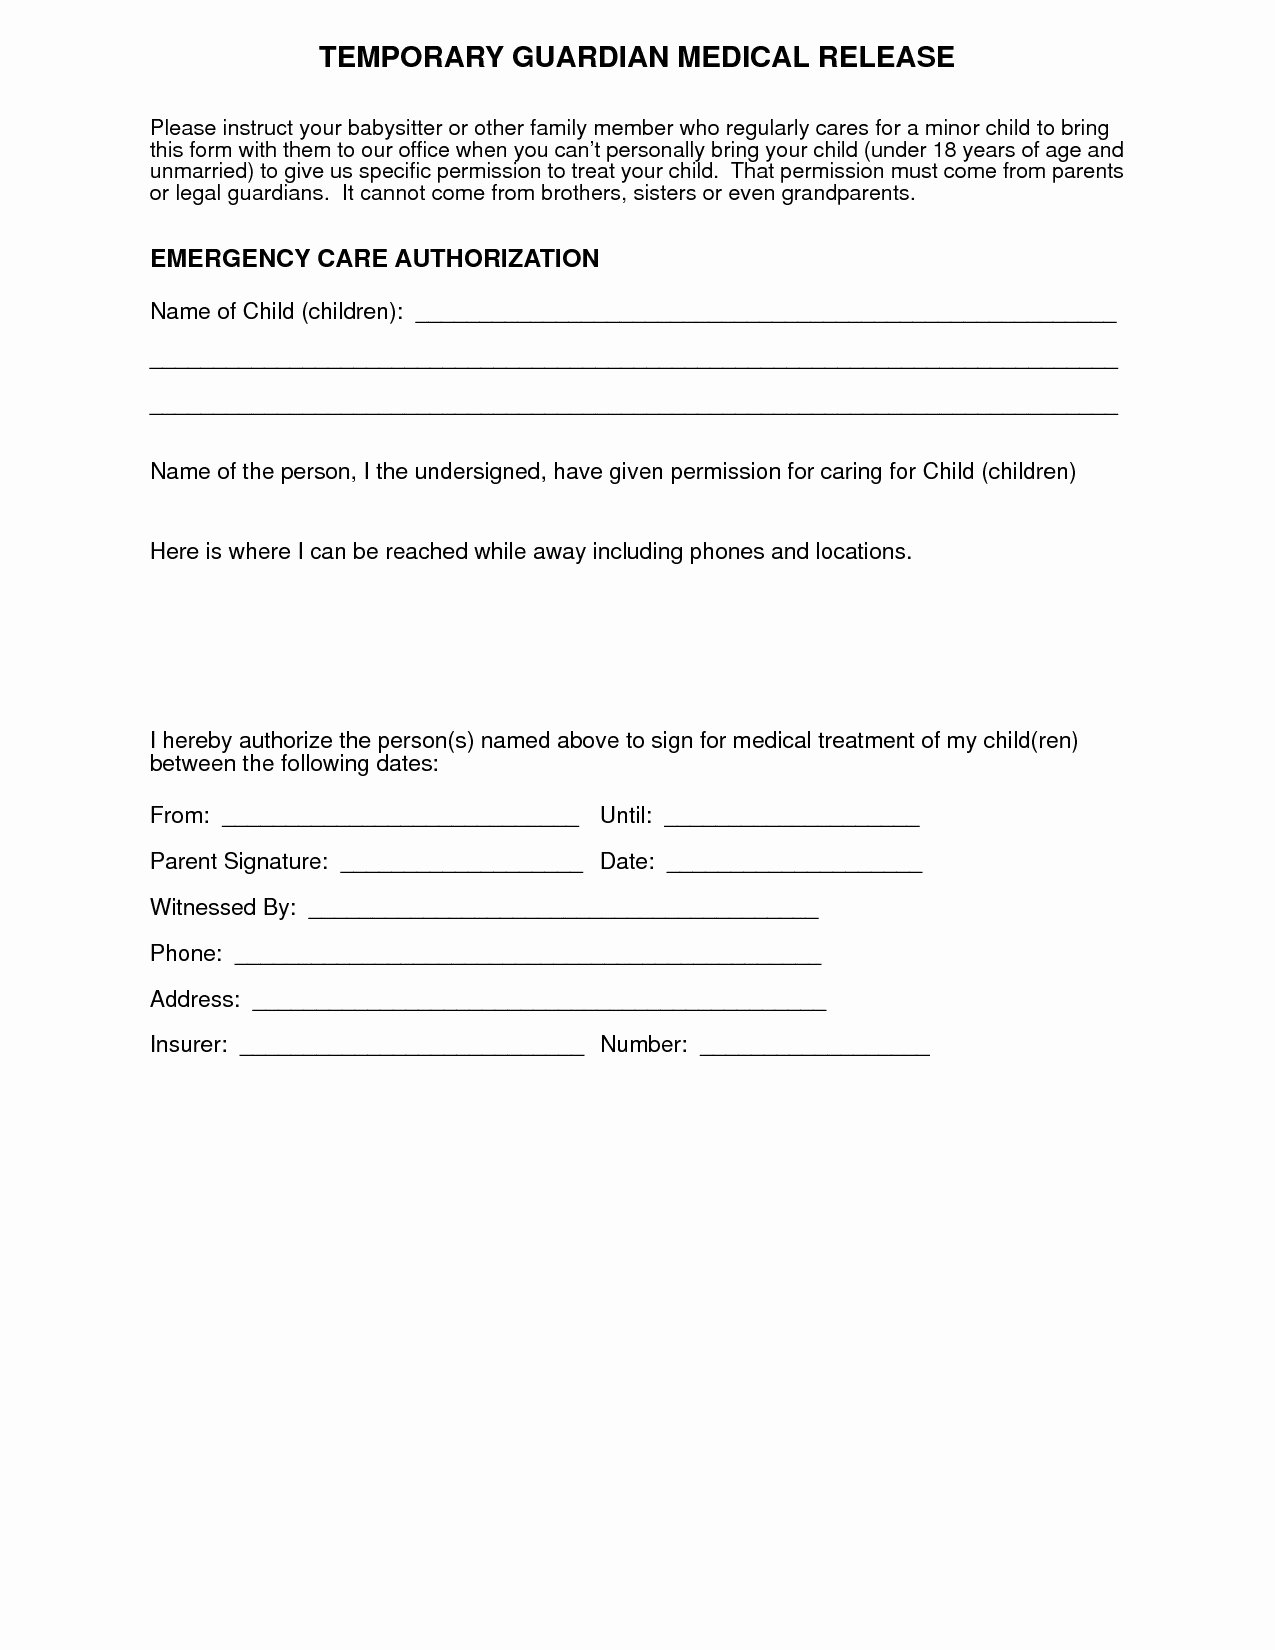 Child Travel Consent form Template Awesome Letter Consent for Travel A Minor Child Template